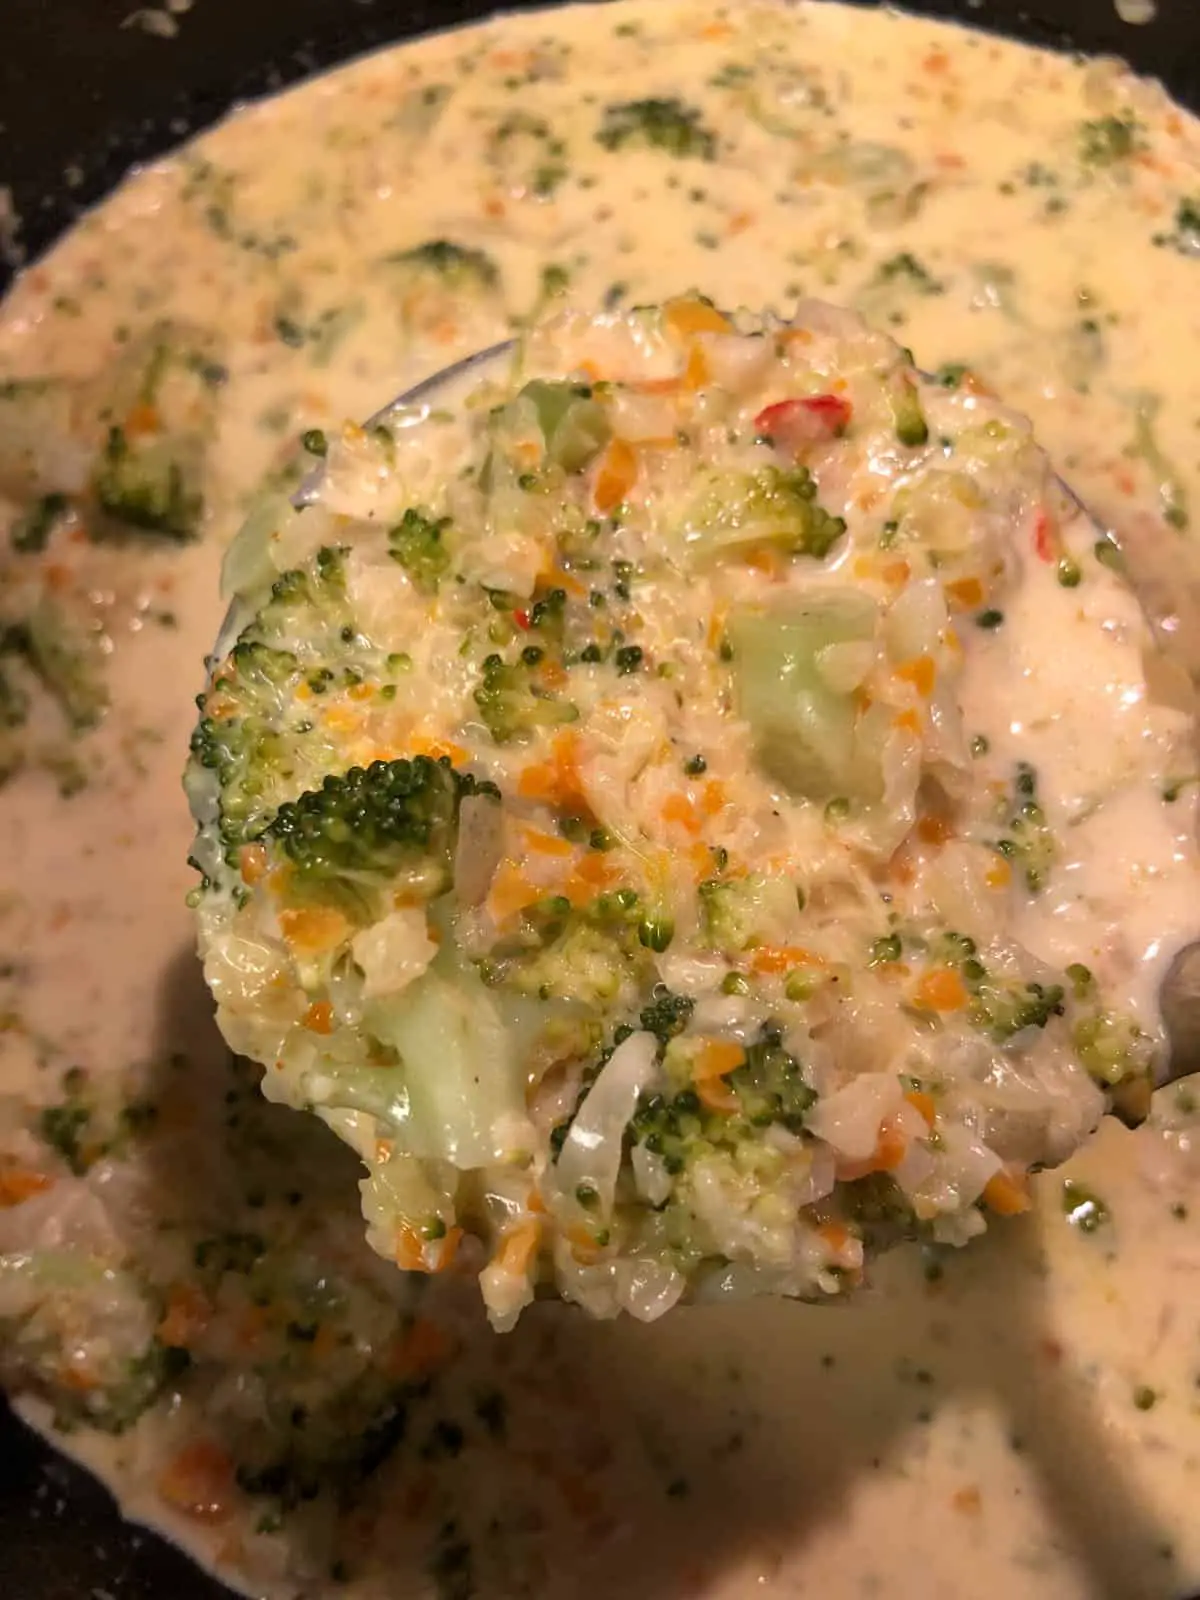 Broccoli and cheddar soup with minced carrots and onion and small pieces or broccoli visible in the soup with a ladle holding some of the soup in the foreground.